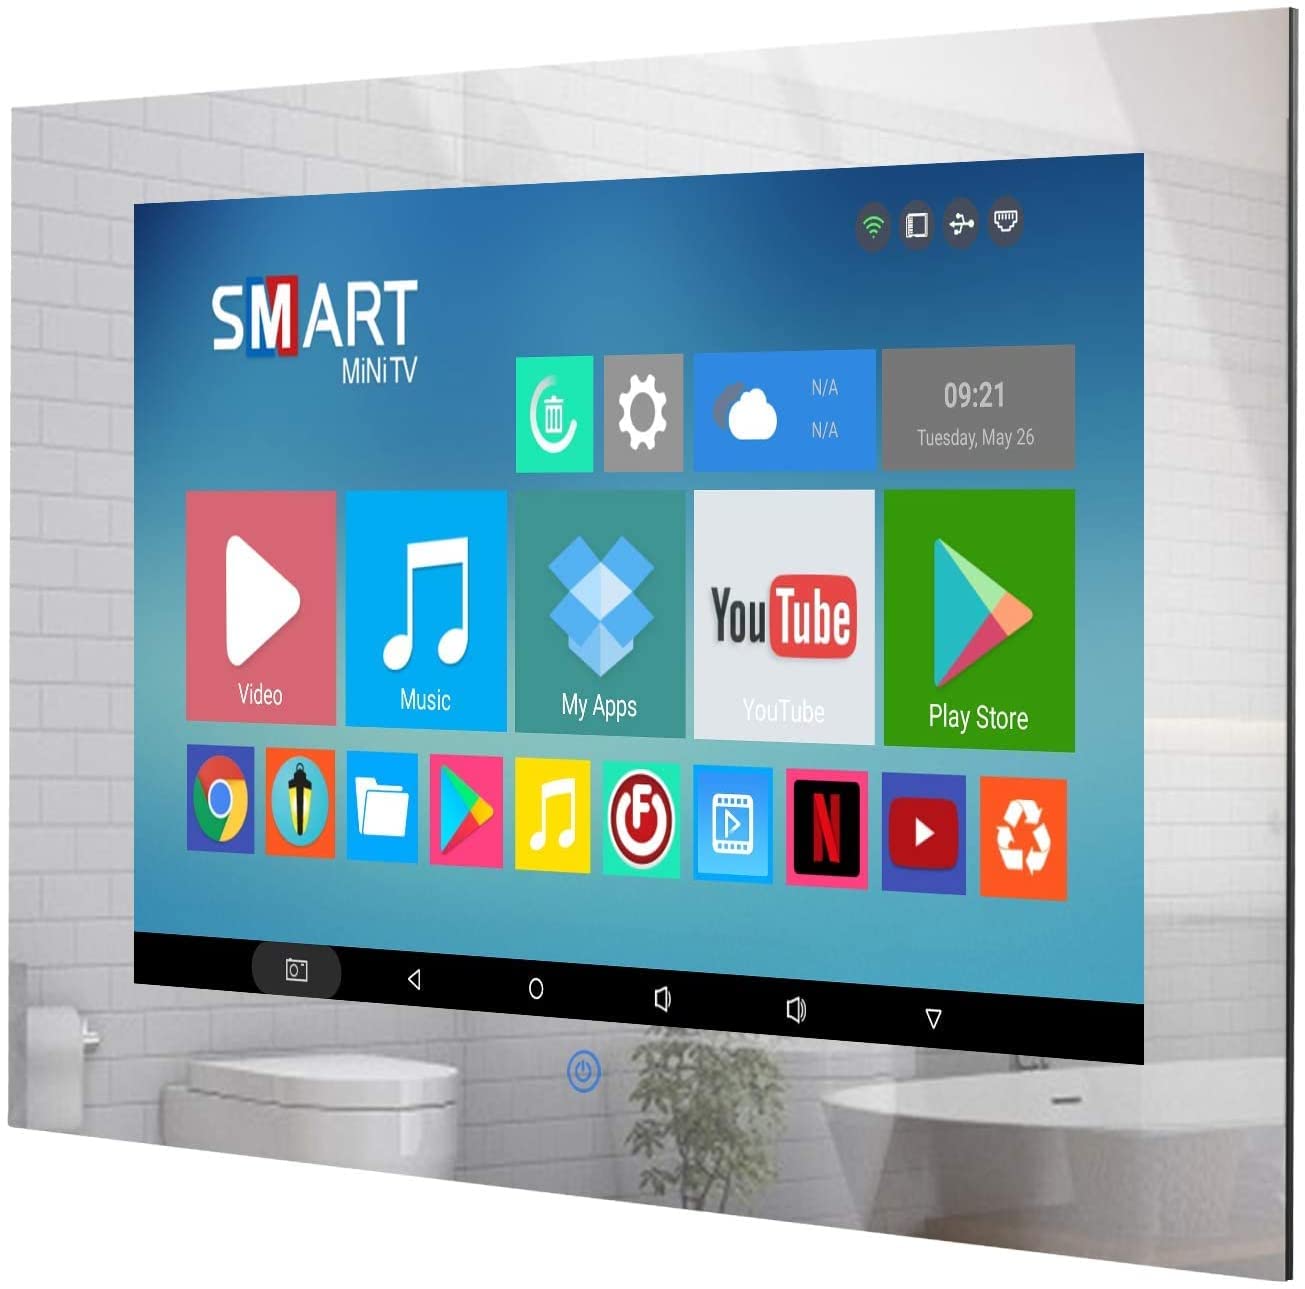 Small 19 inch Bathroom Mirror TV IP66 Waterproof Smart Android 11.0 Television LED 1080P Built-in ATSC Tuner Wi-Fi Bluetooth (LEHG190BM-M)